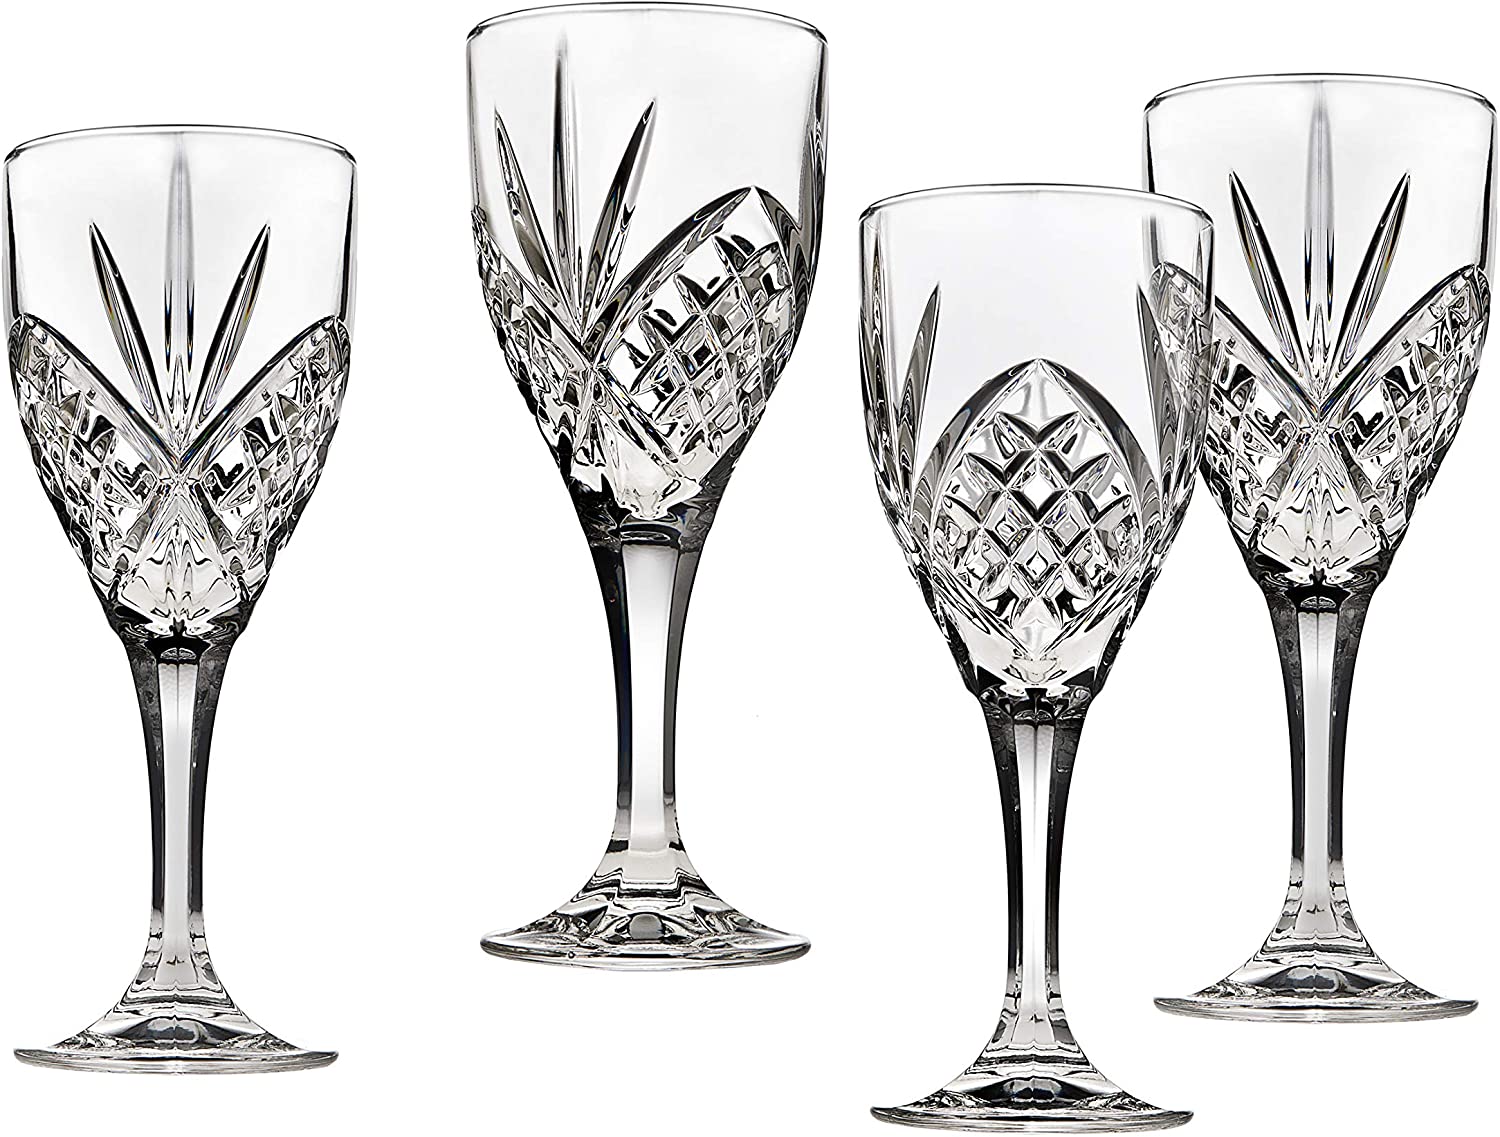 Dublin Crystal Goblet Glassware, Set of 4 without Gold